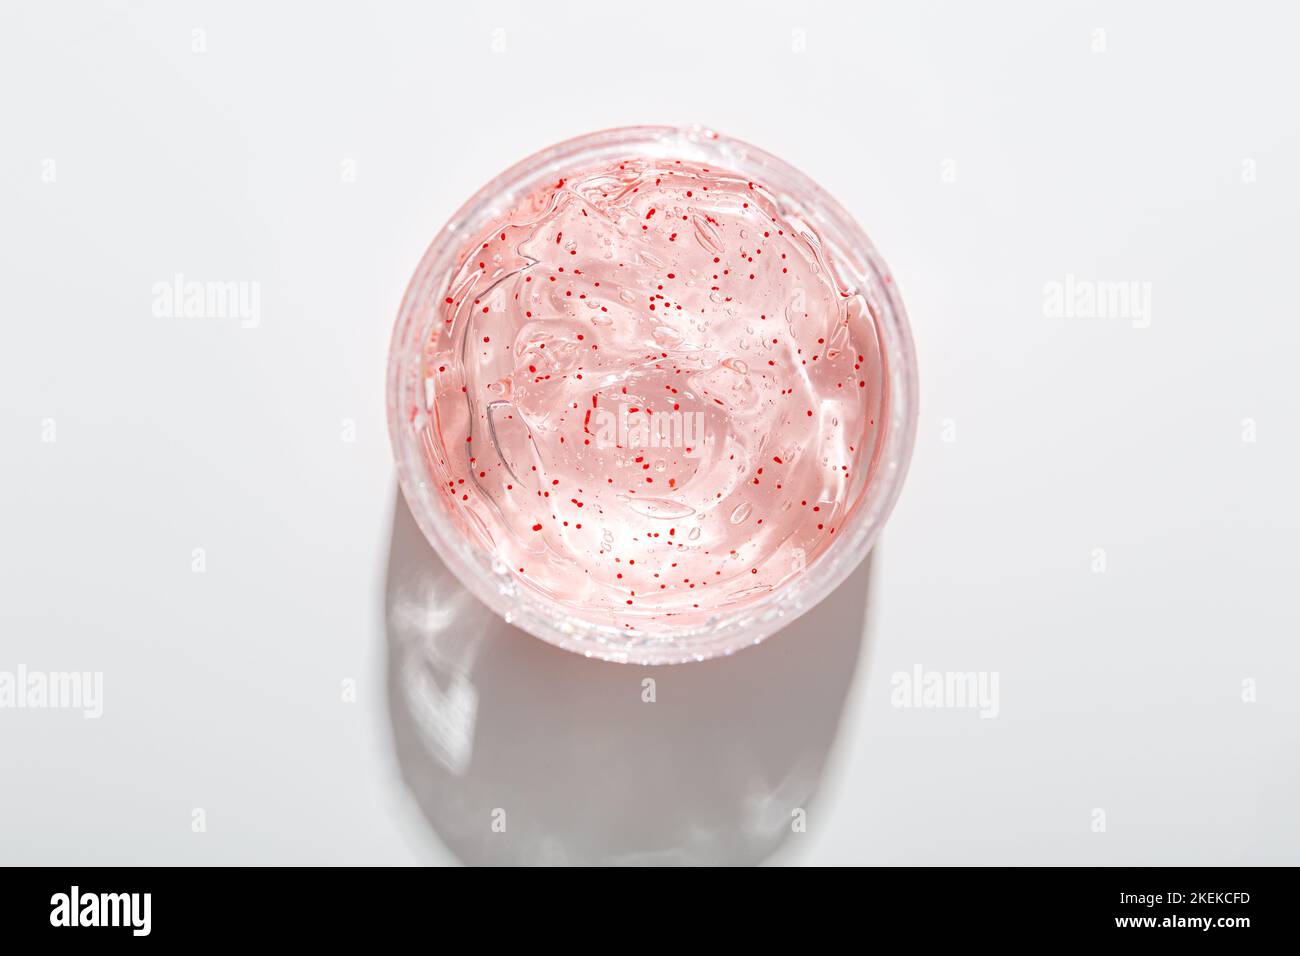 Top view of facial transparent gel with red exfoliating particles in jar on light surface Stock Photo